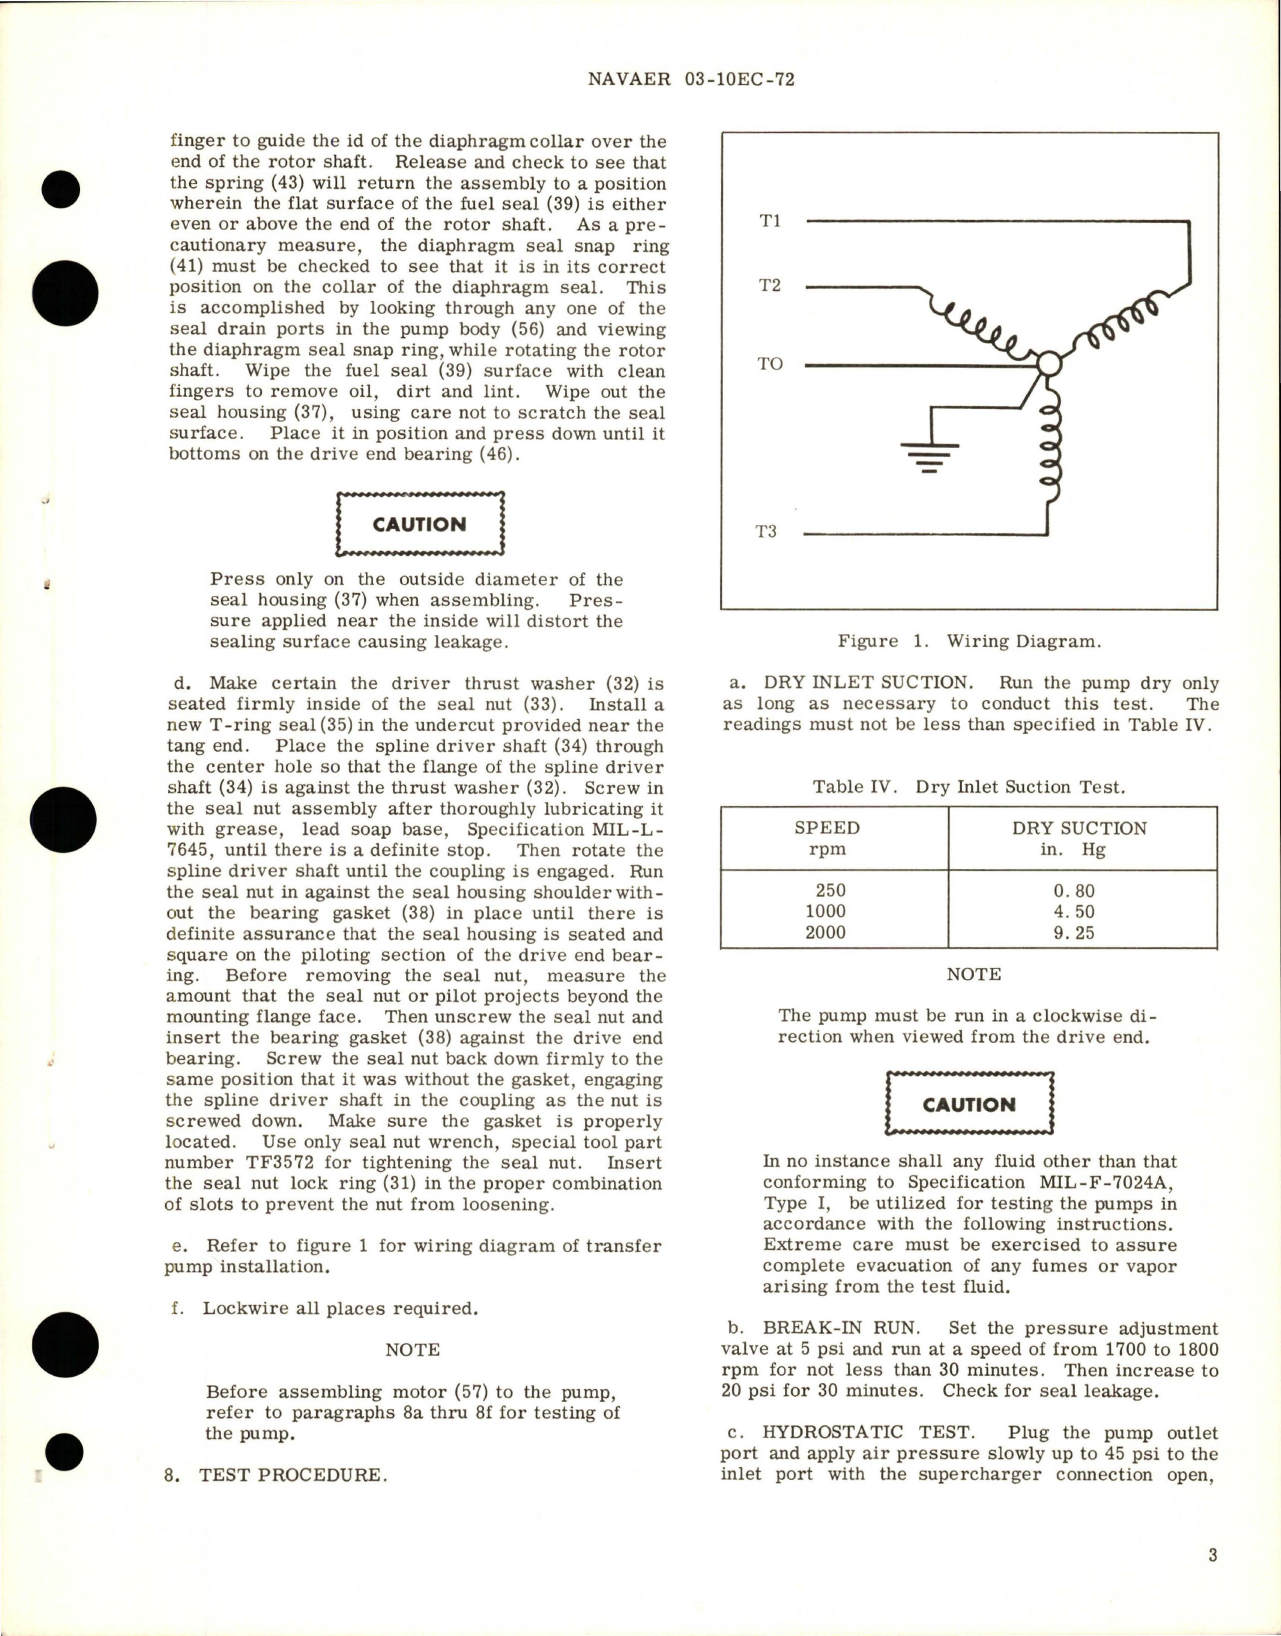 Sample page 5 from AirCorps Library document: Overhaul Instructions with Illustrated Parts Breakdown for Transfer Pump Assembly - Model TF135400-2